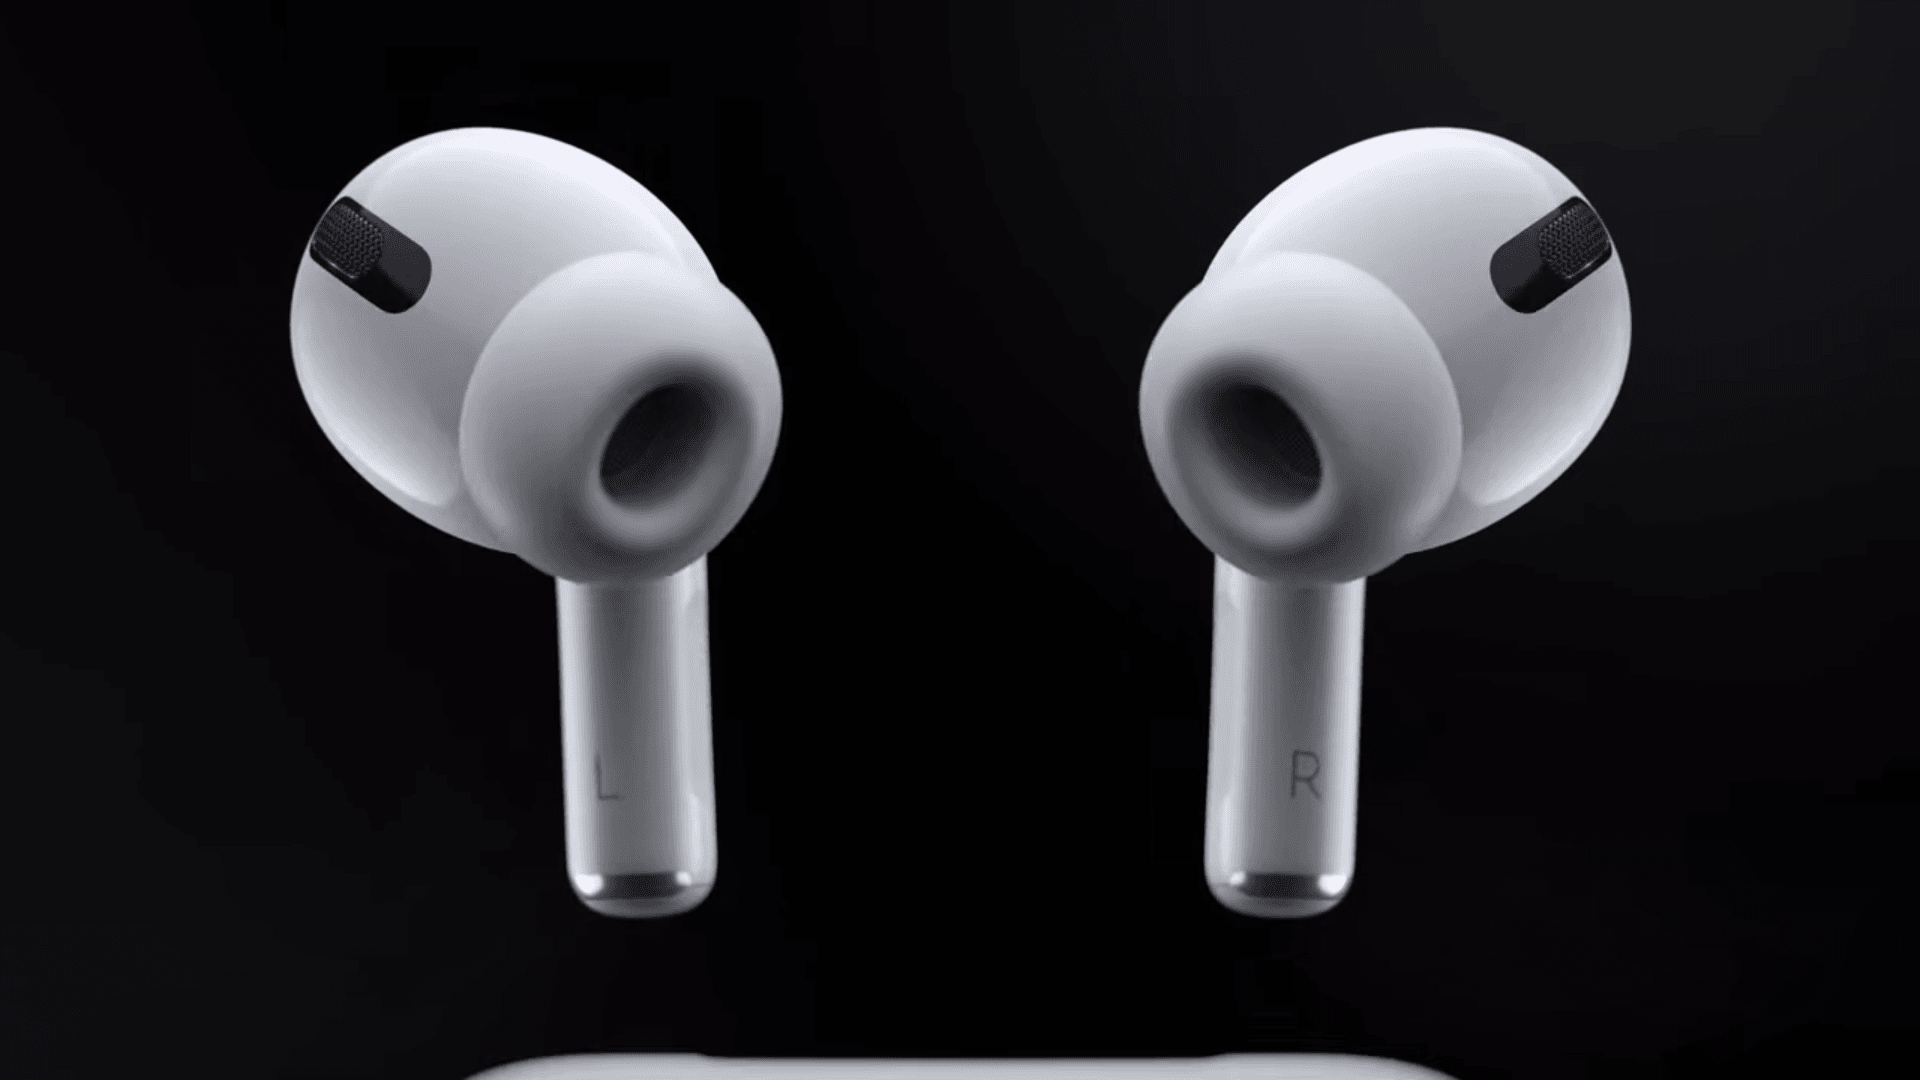 Airpods pro huilian. Apple AIRPODS Pro 1. AIRPODS Pro 2. Apple AIRPODS Pro Pro 2. AIRPODS Pro 2 2021.